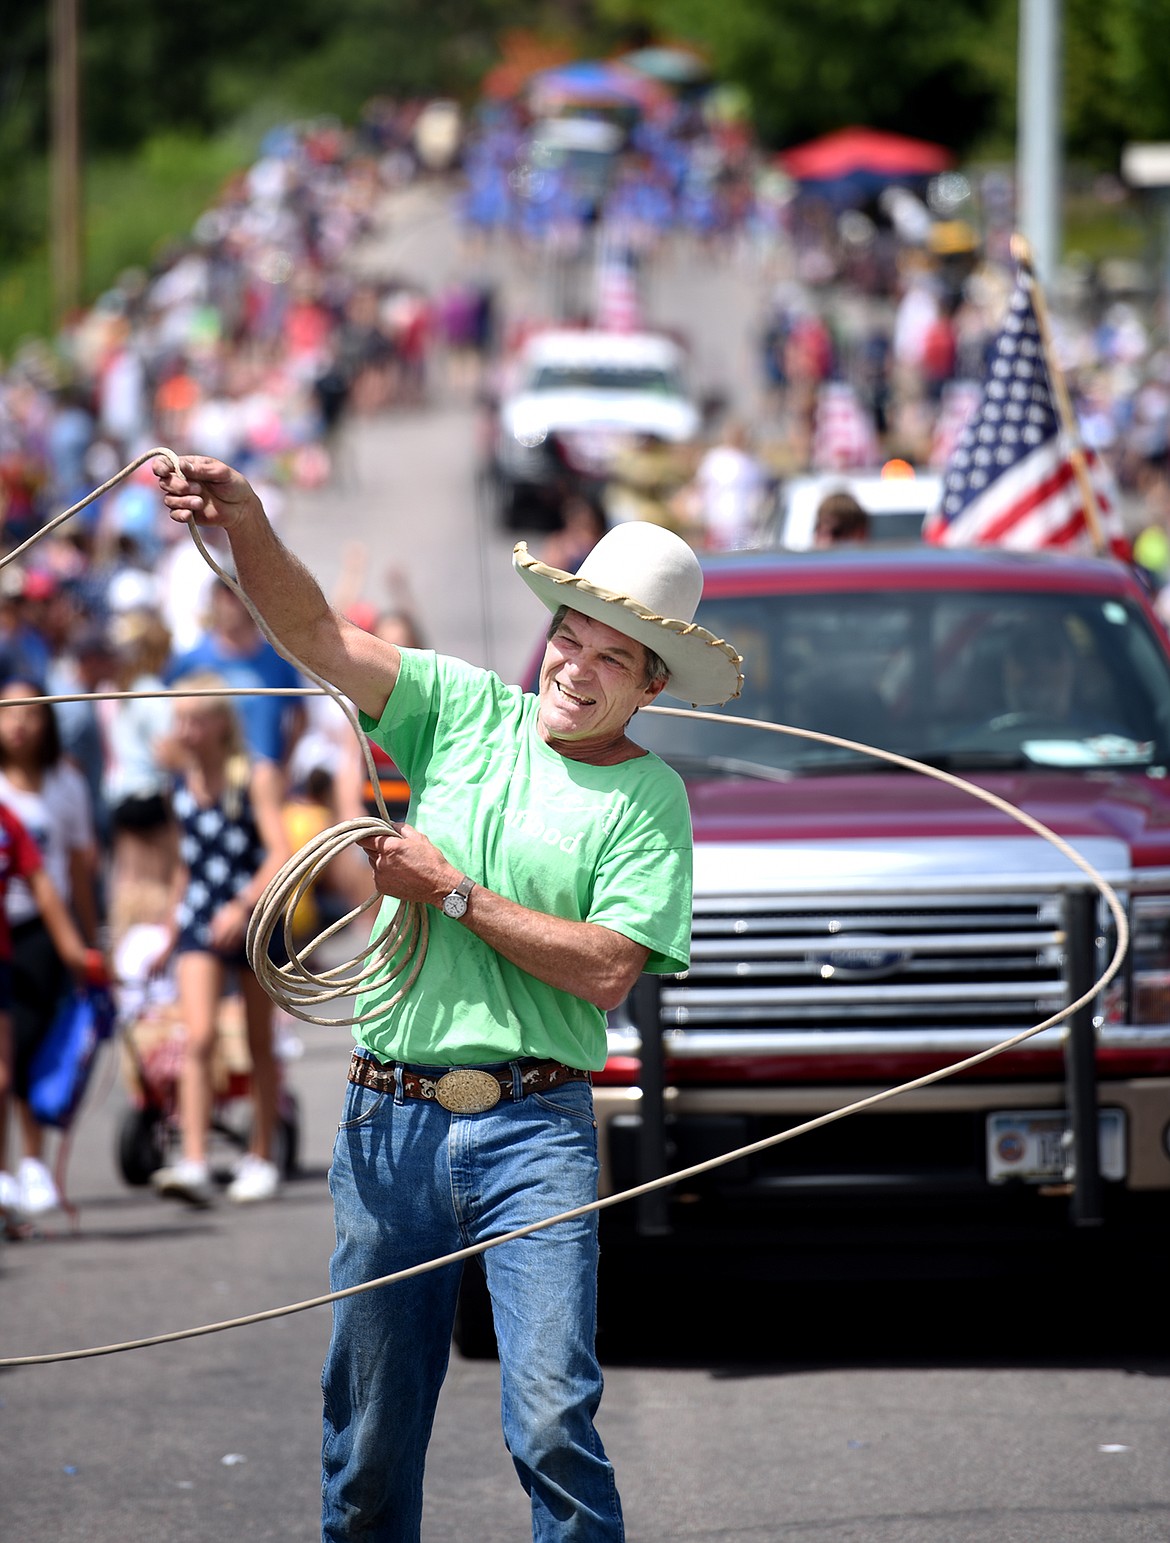 Lasso tricks during the Bigfork Fourth of July Parade on Tuesday afternoon, July 4. (Brenda Ahearn/Daily Inter Lake)